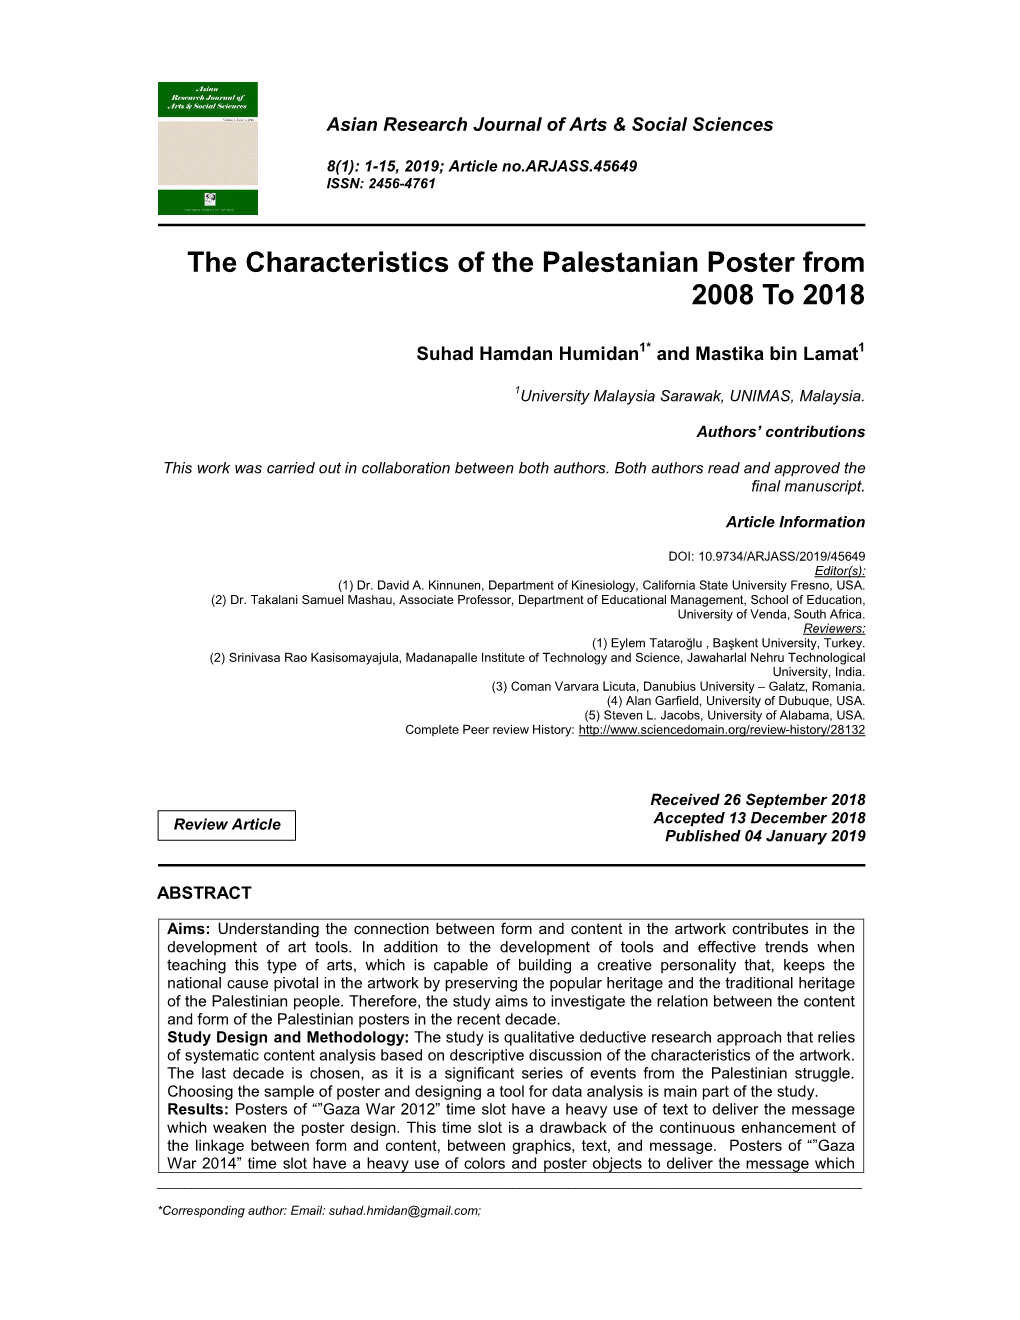 The Characteristics of the Palestanian Poster from 2008 to 2018